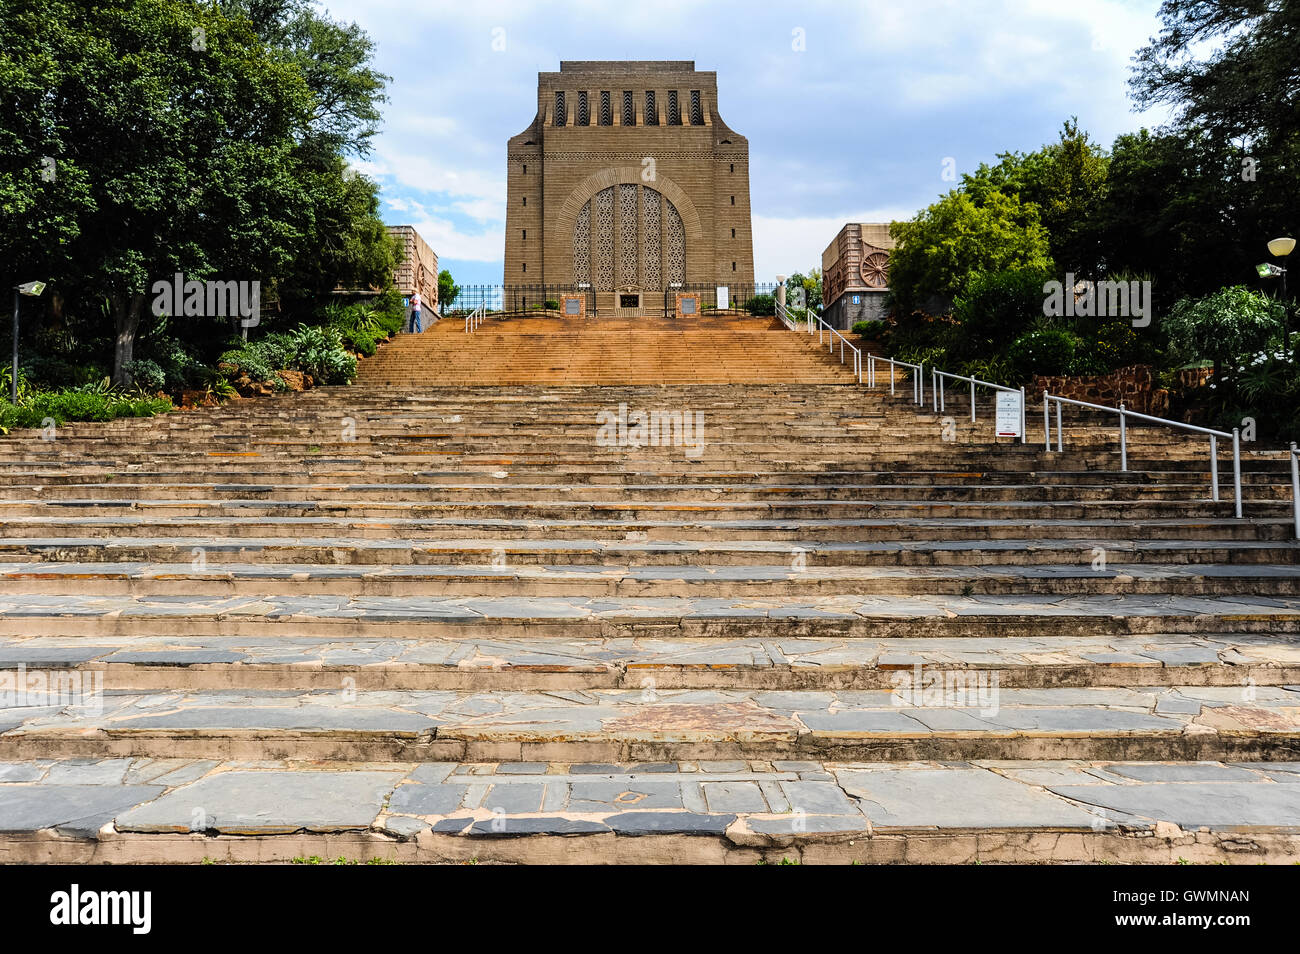 The Voortrekker Monument is situated in Pretoria, South Africa. Built in memory of the Voortrekkers, pioneers who left the Cape Colony in the thousands between 1835 and 1854. Stock Photo